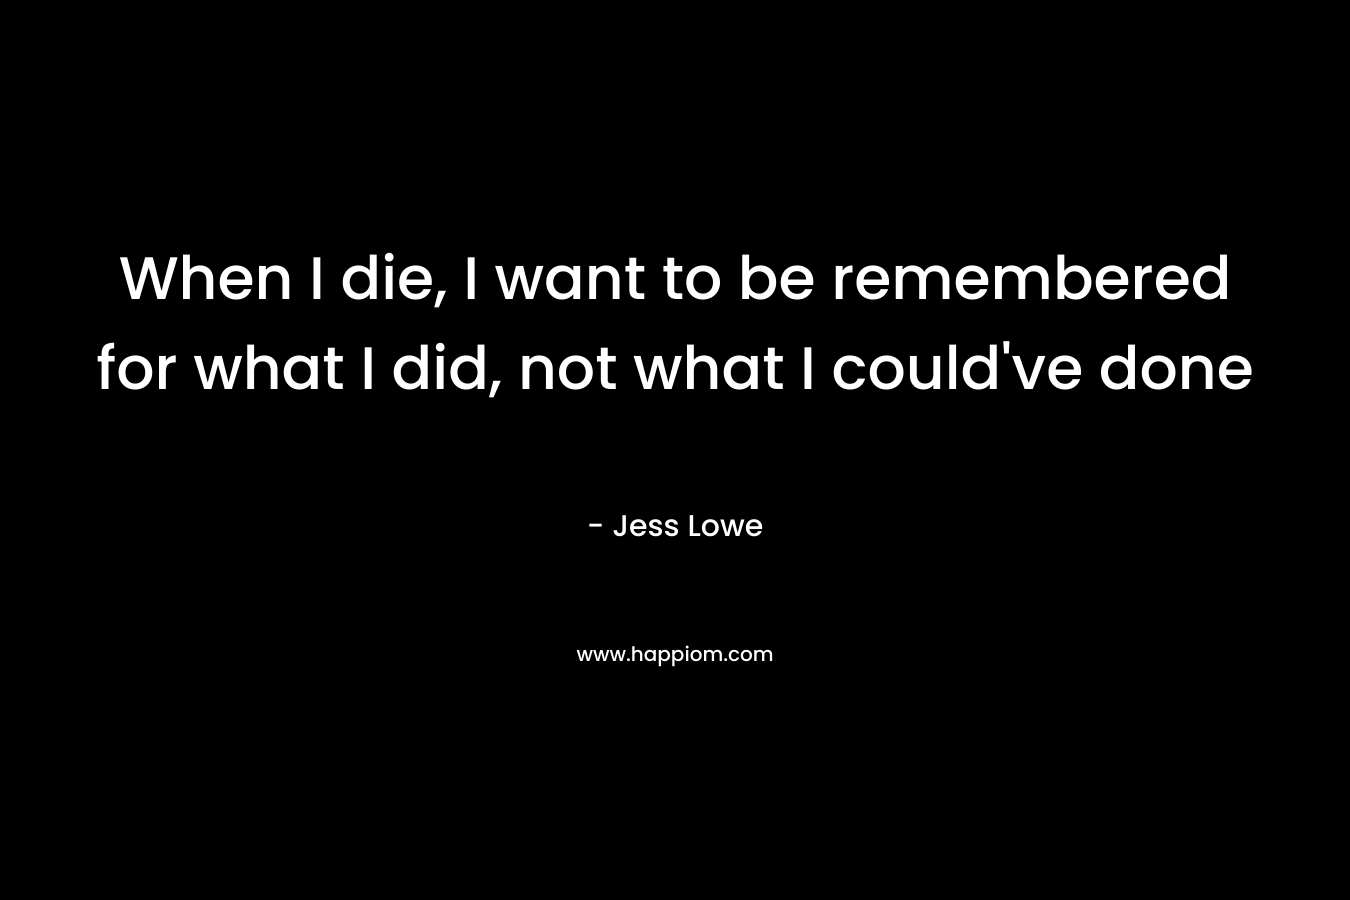 When I die, I want to be remembered for what I did, not what I could’ve done – Jess Lowe